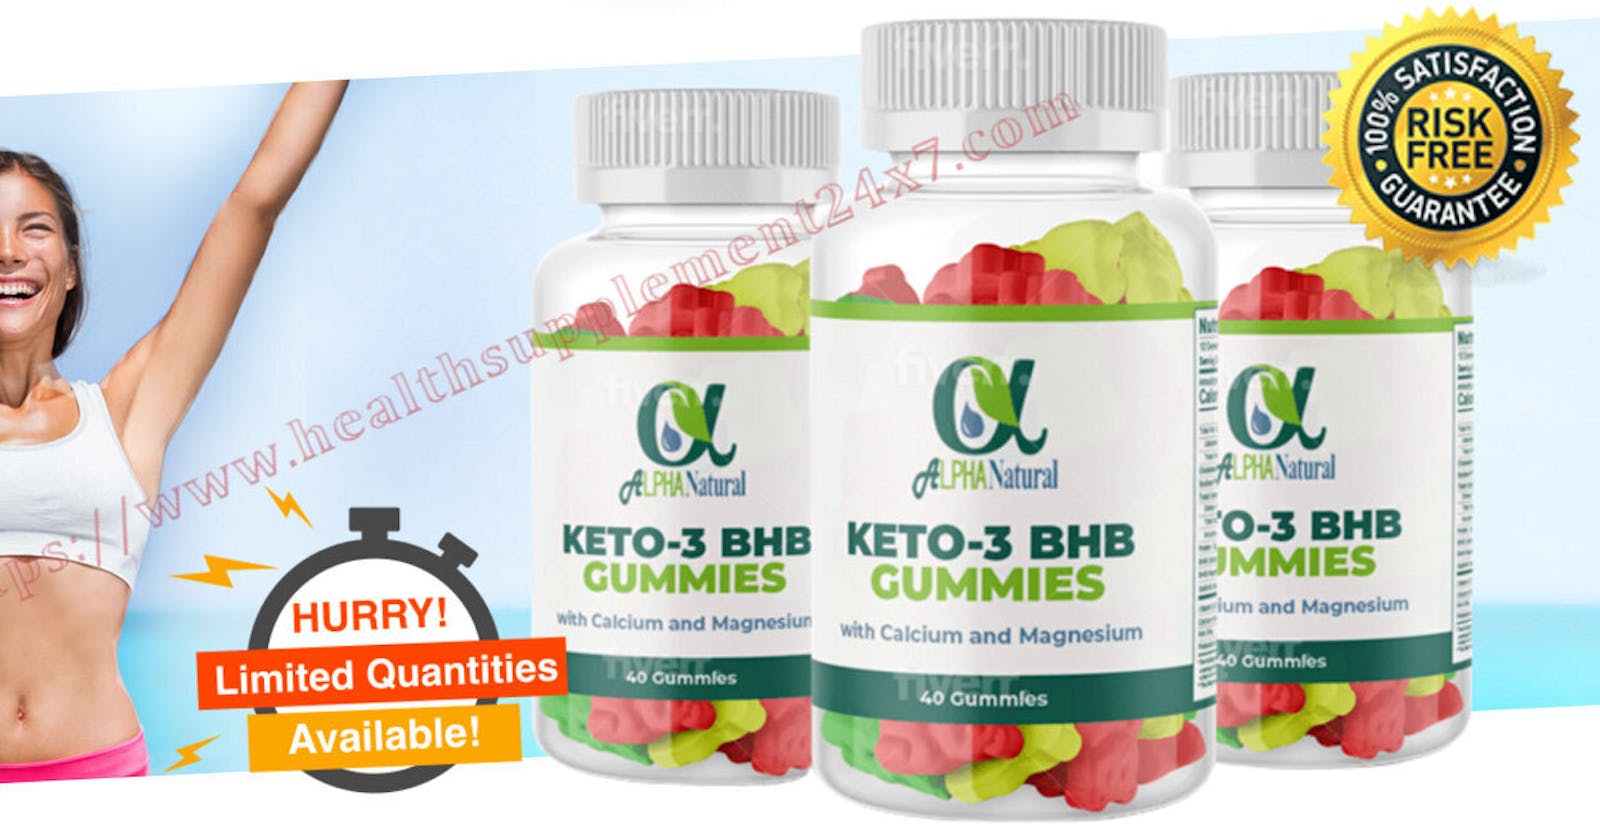 Alpha Natural Keto BHB Gummies Weight Loss Effective Way To Control OverWeight And Accelerate The Metabolism To Burn Fat(Spam Or Legit)